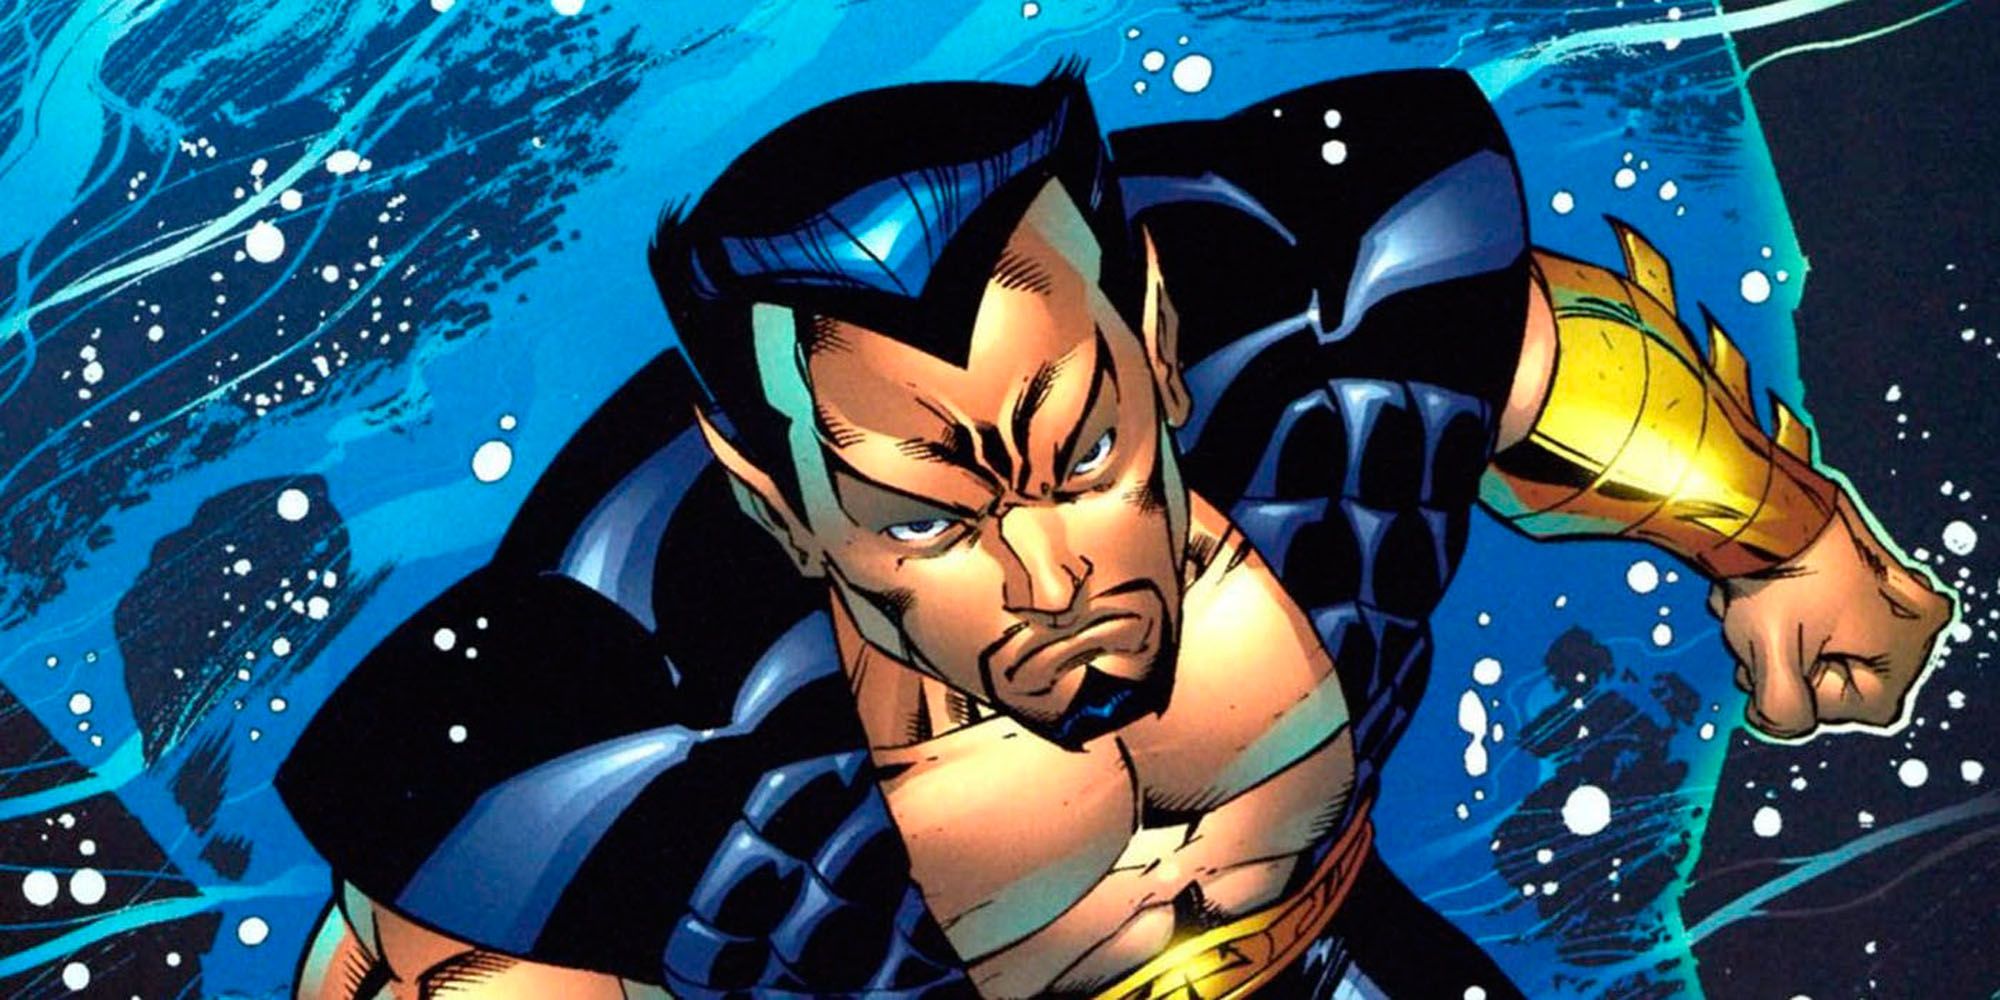 Namor in a black costume while underwater